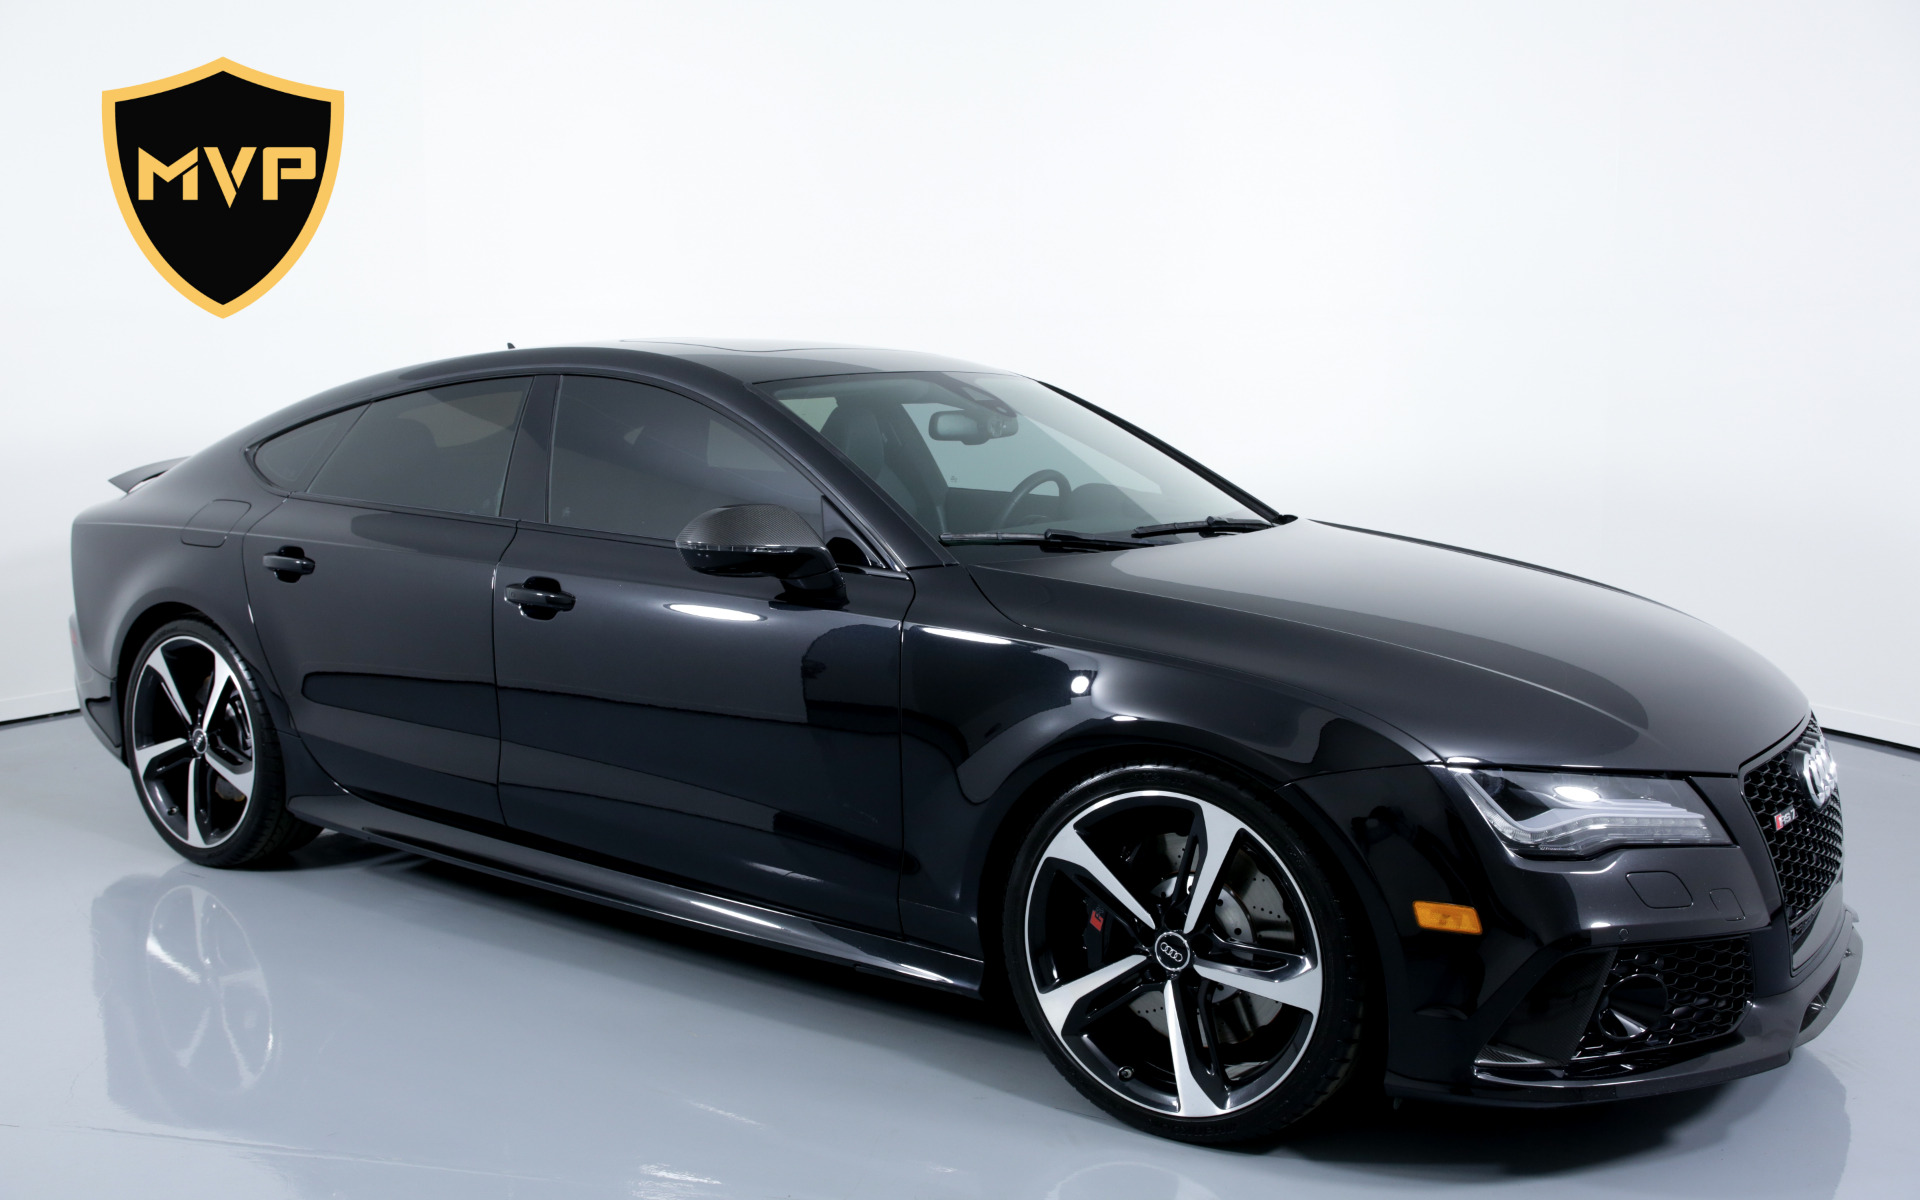 Used 2015 AUDI RS7 For Sale ($399) | MVP Charlotte Stock #900260